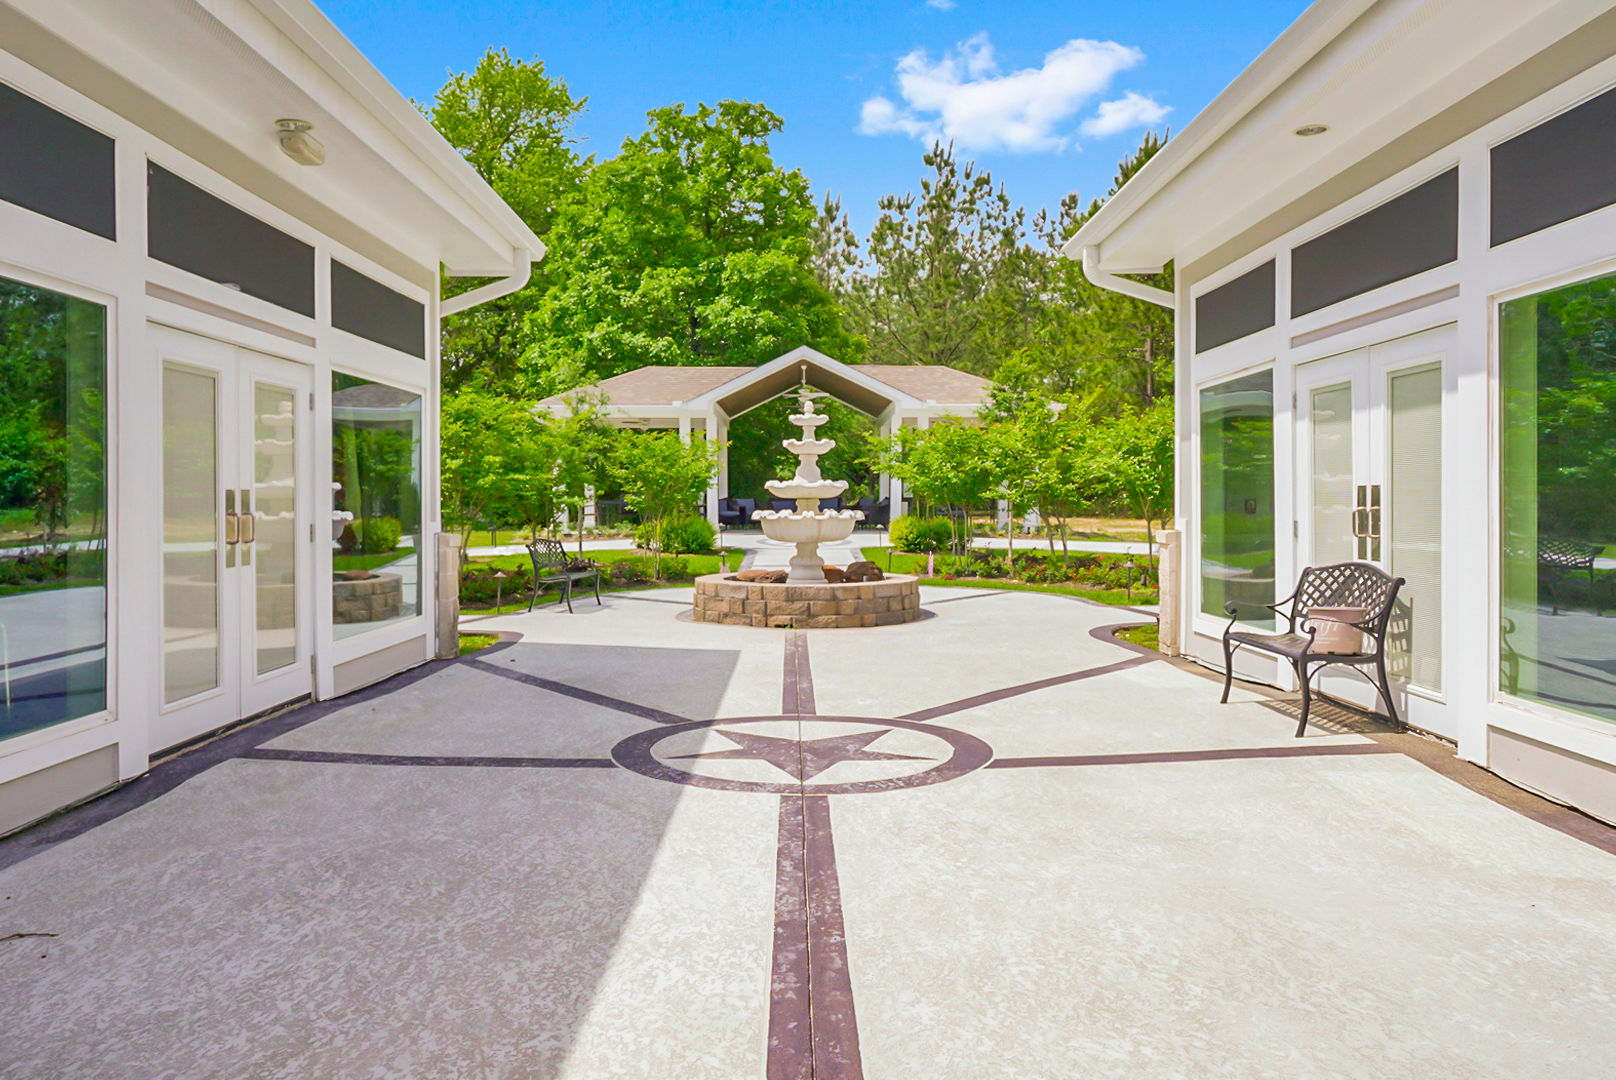 A well-maintained outdoor courtyard and fountain at Sundale Senior Living in Huntsville, TX